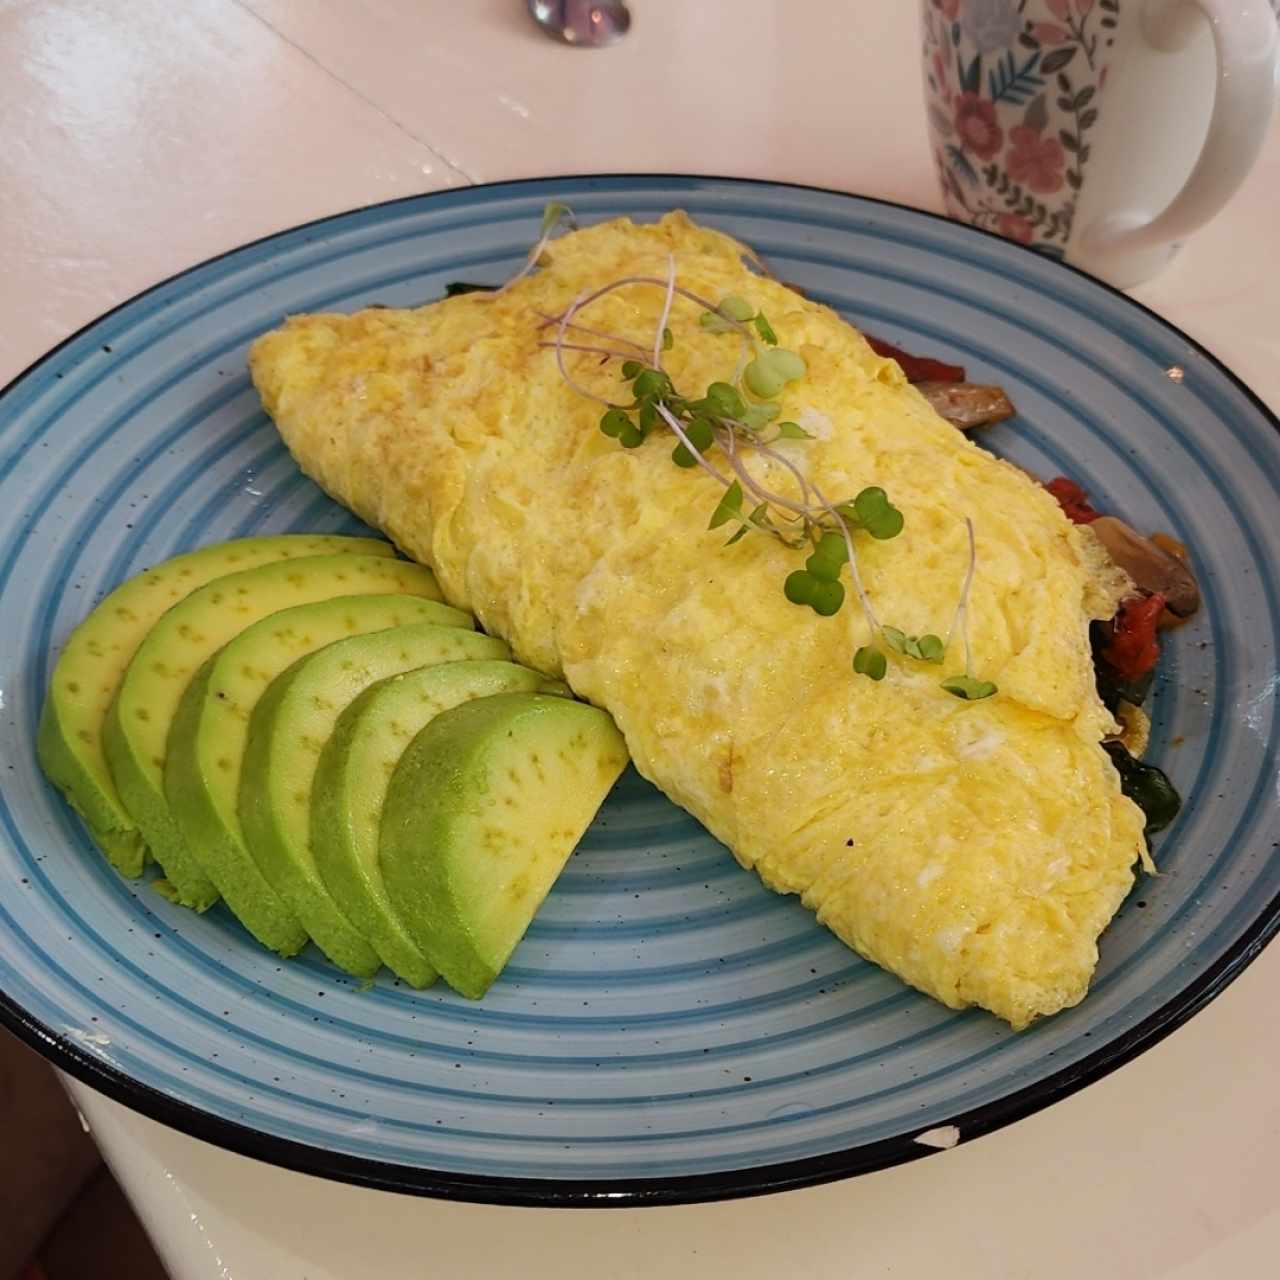 Omelets - Create your own